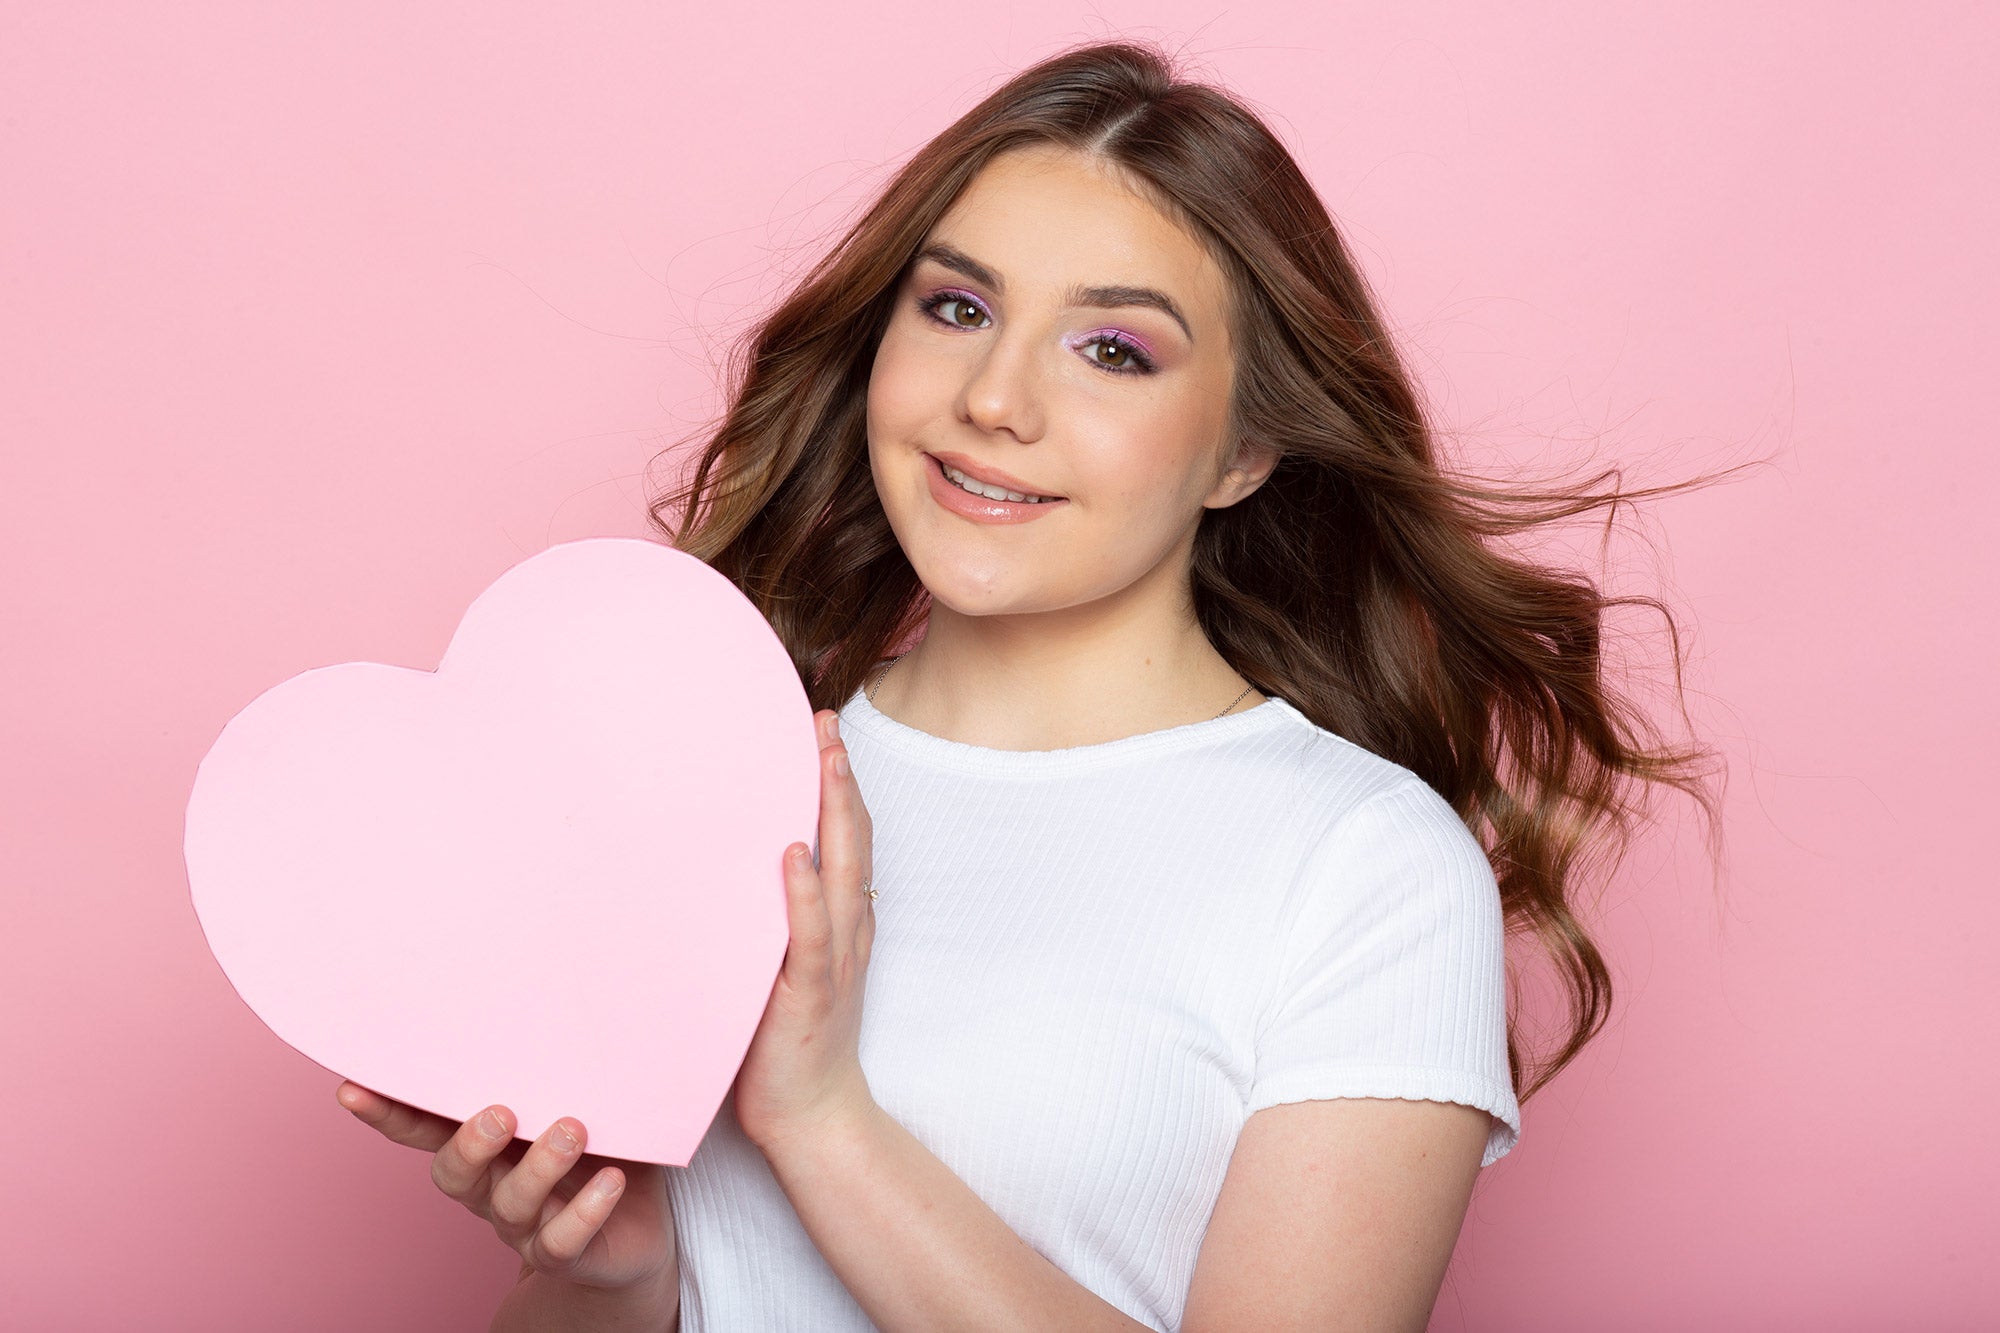 How to Get Piper Rockelle’s Valentine’s Day Look